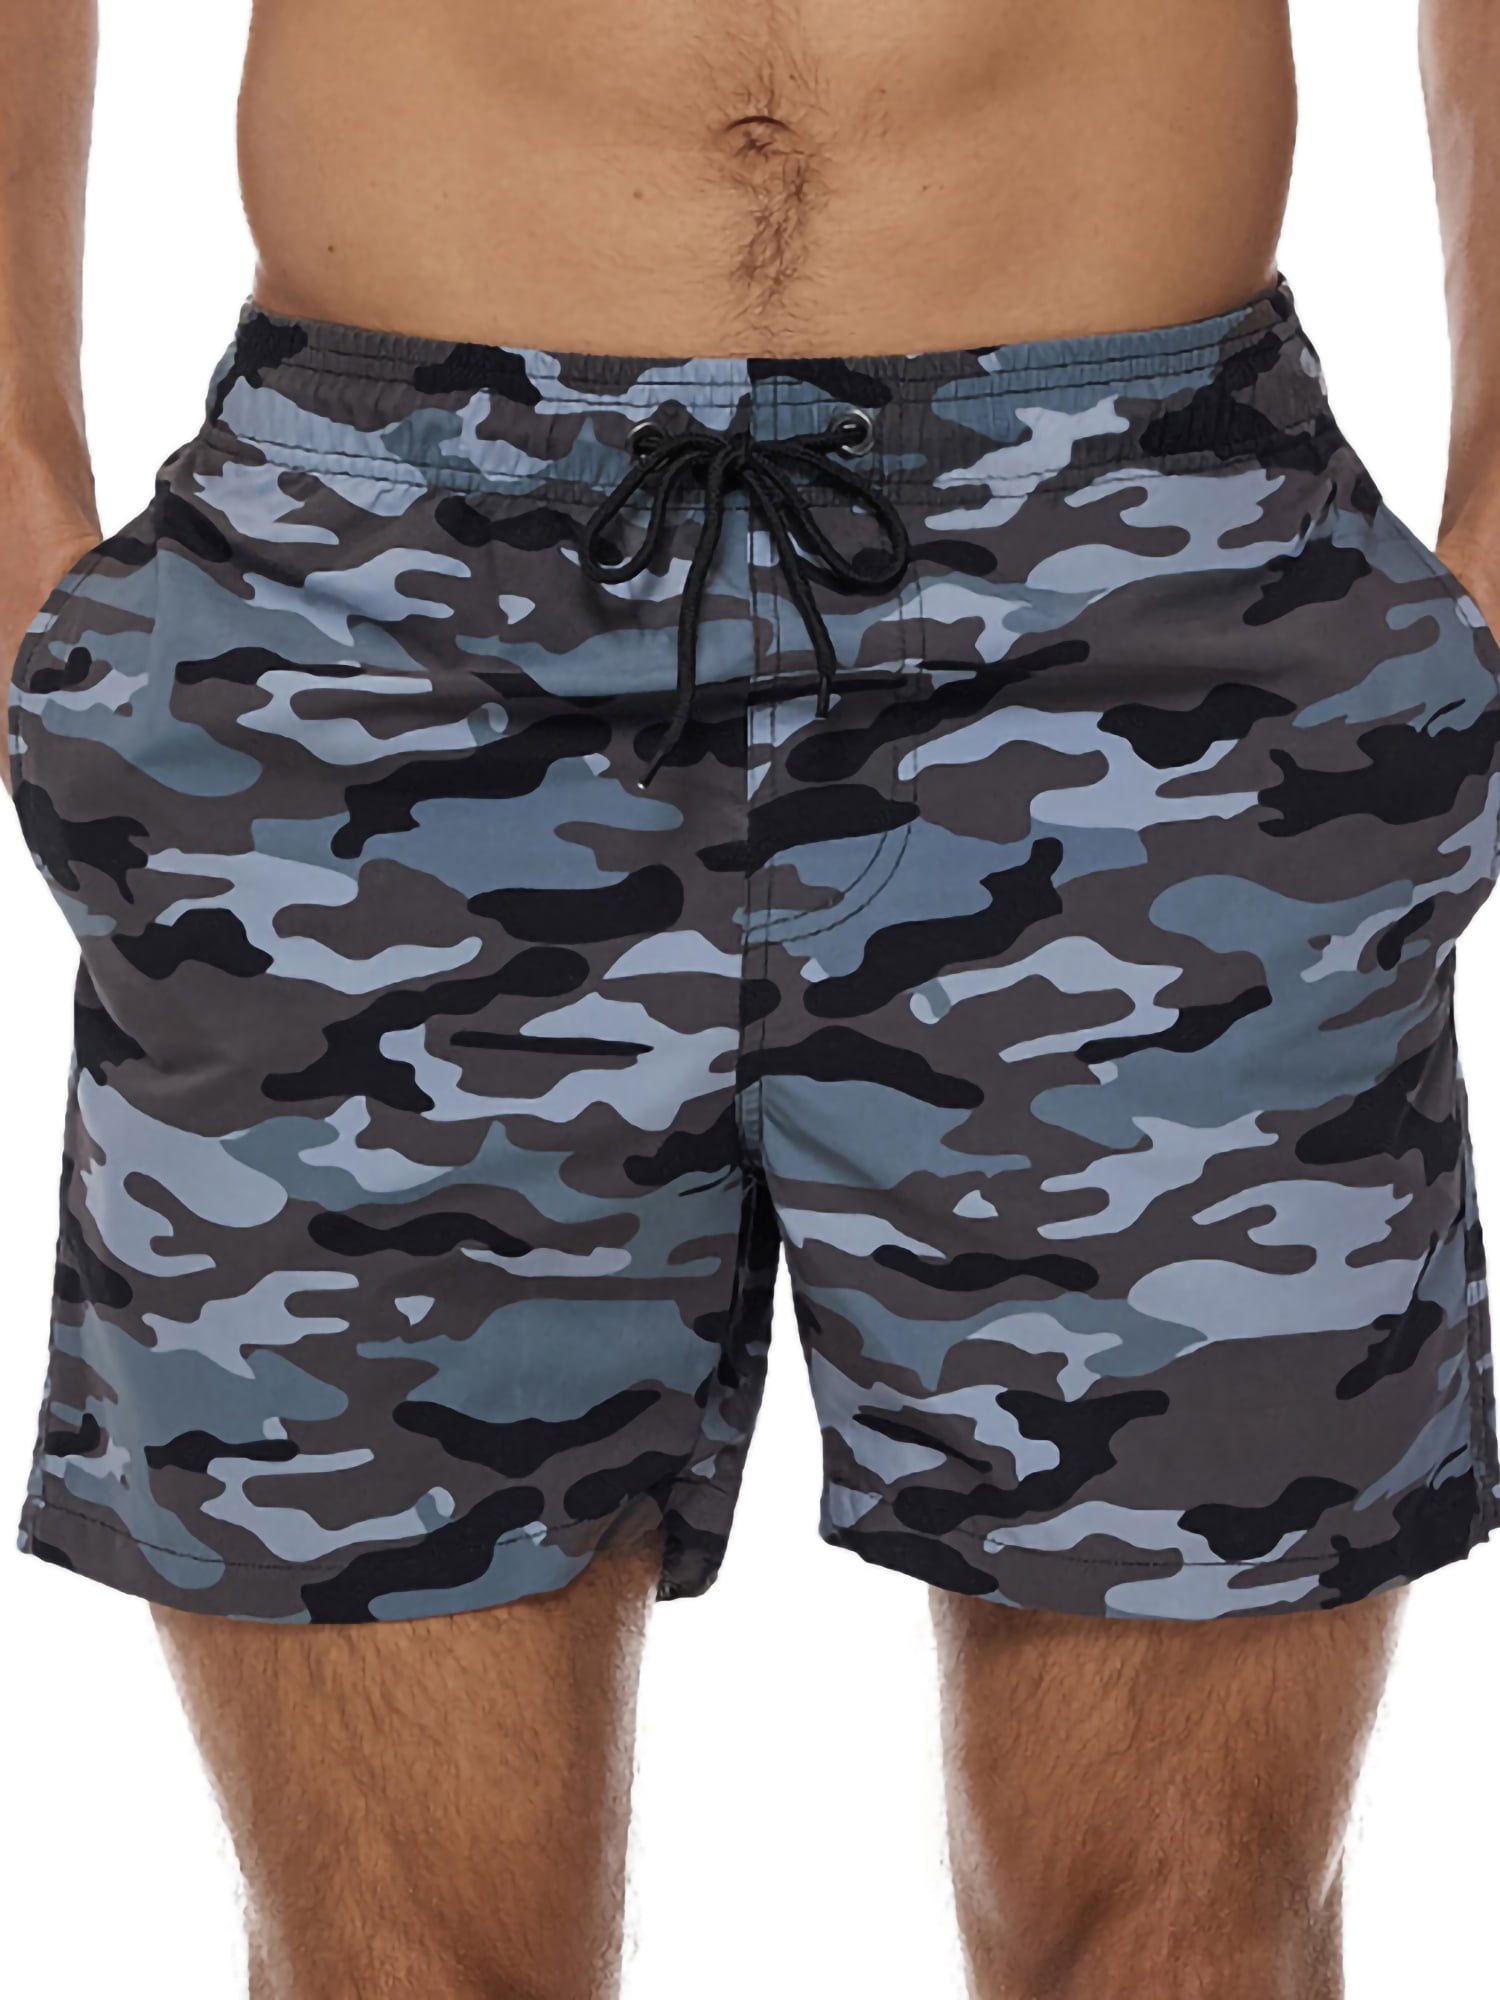 Military Camouflage Texture Pattern Summer Mens Quick-drying Surf Trunks Beach Shorts